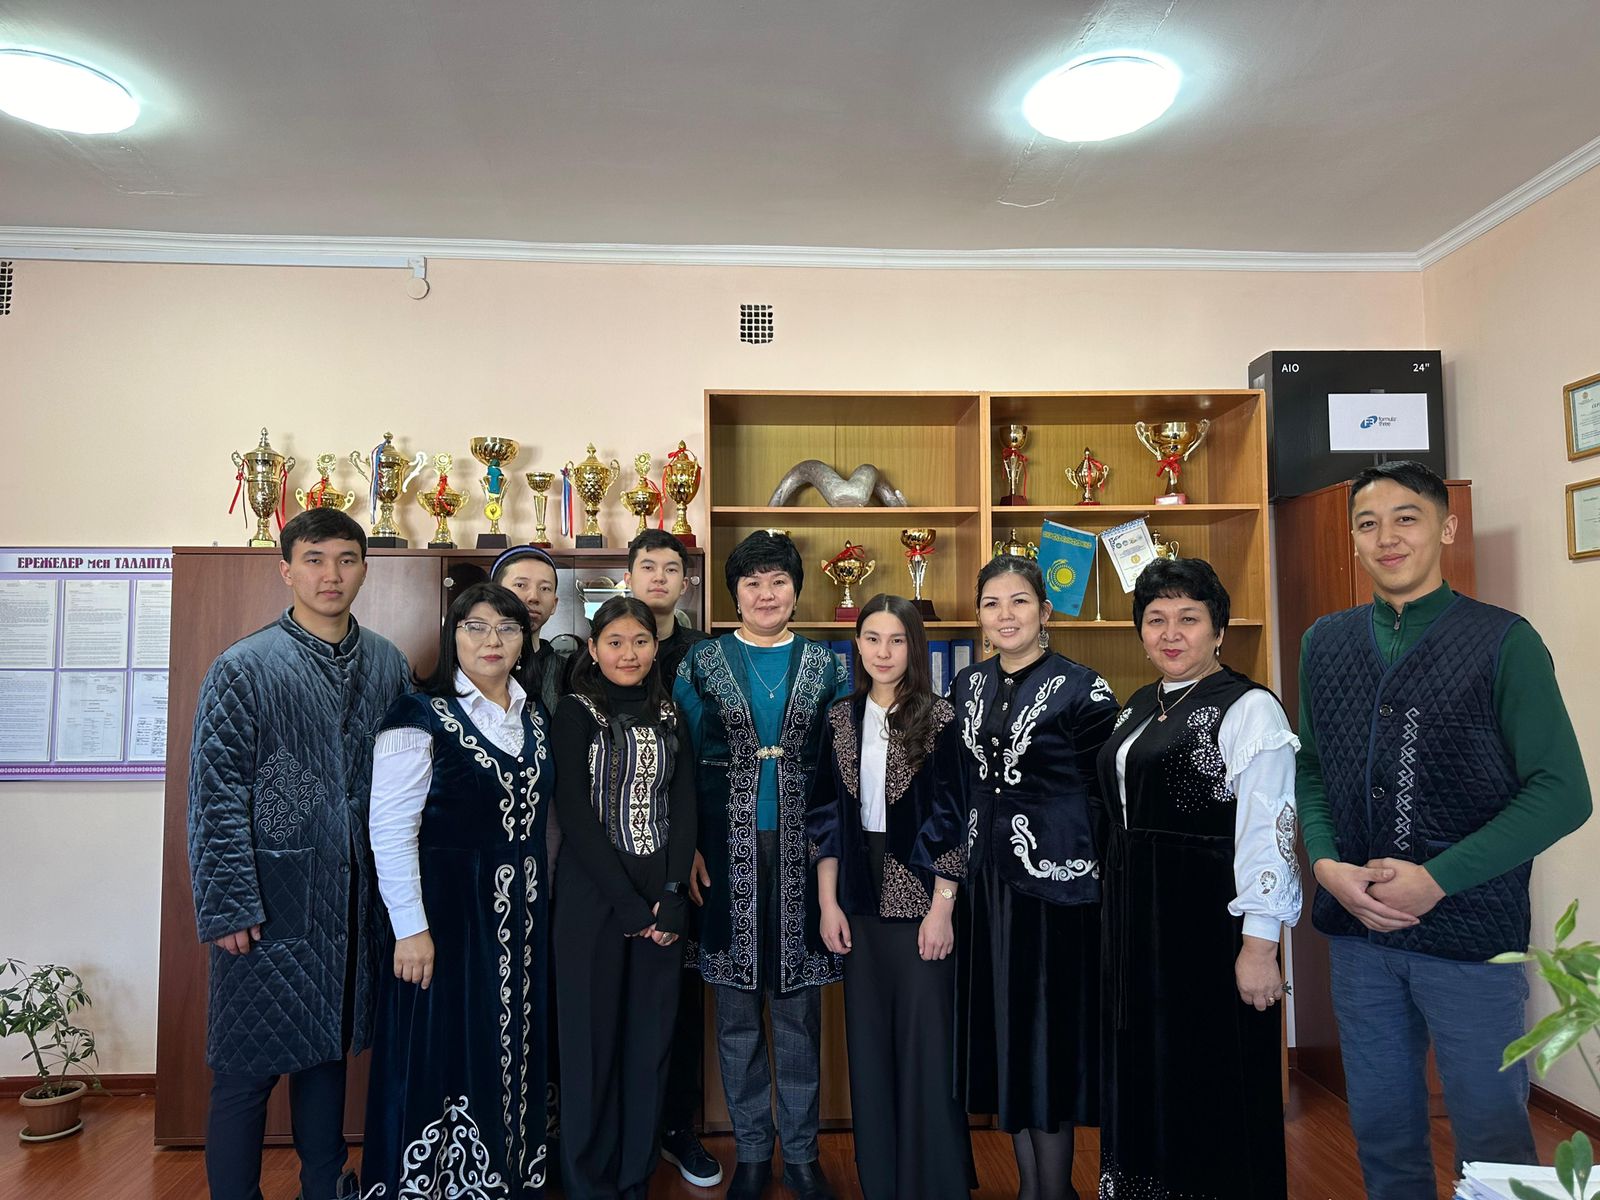 Renewal Day was celebrated at the Agrarian Faculty